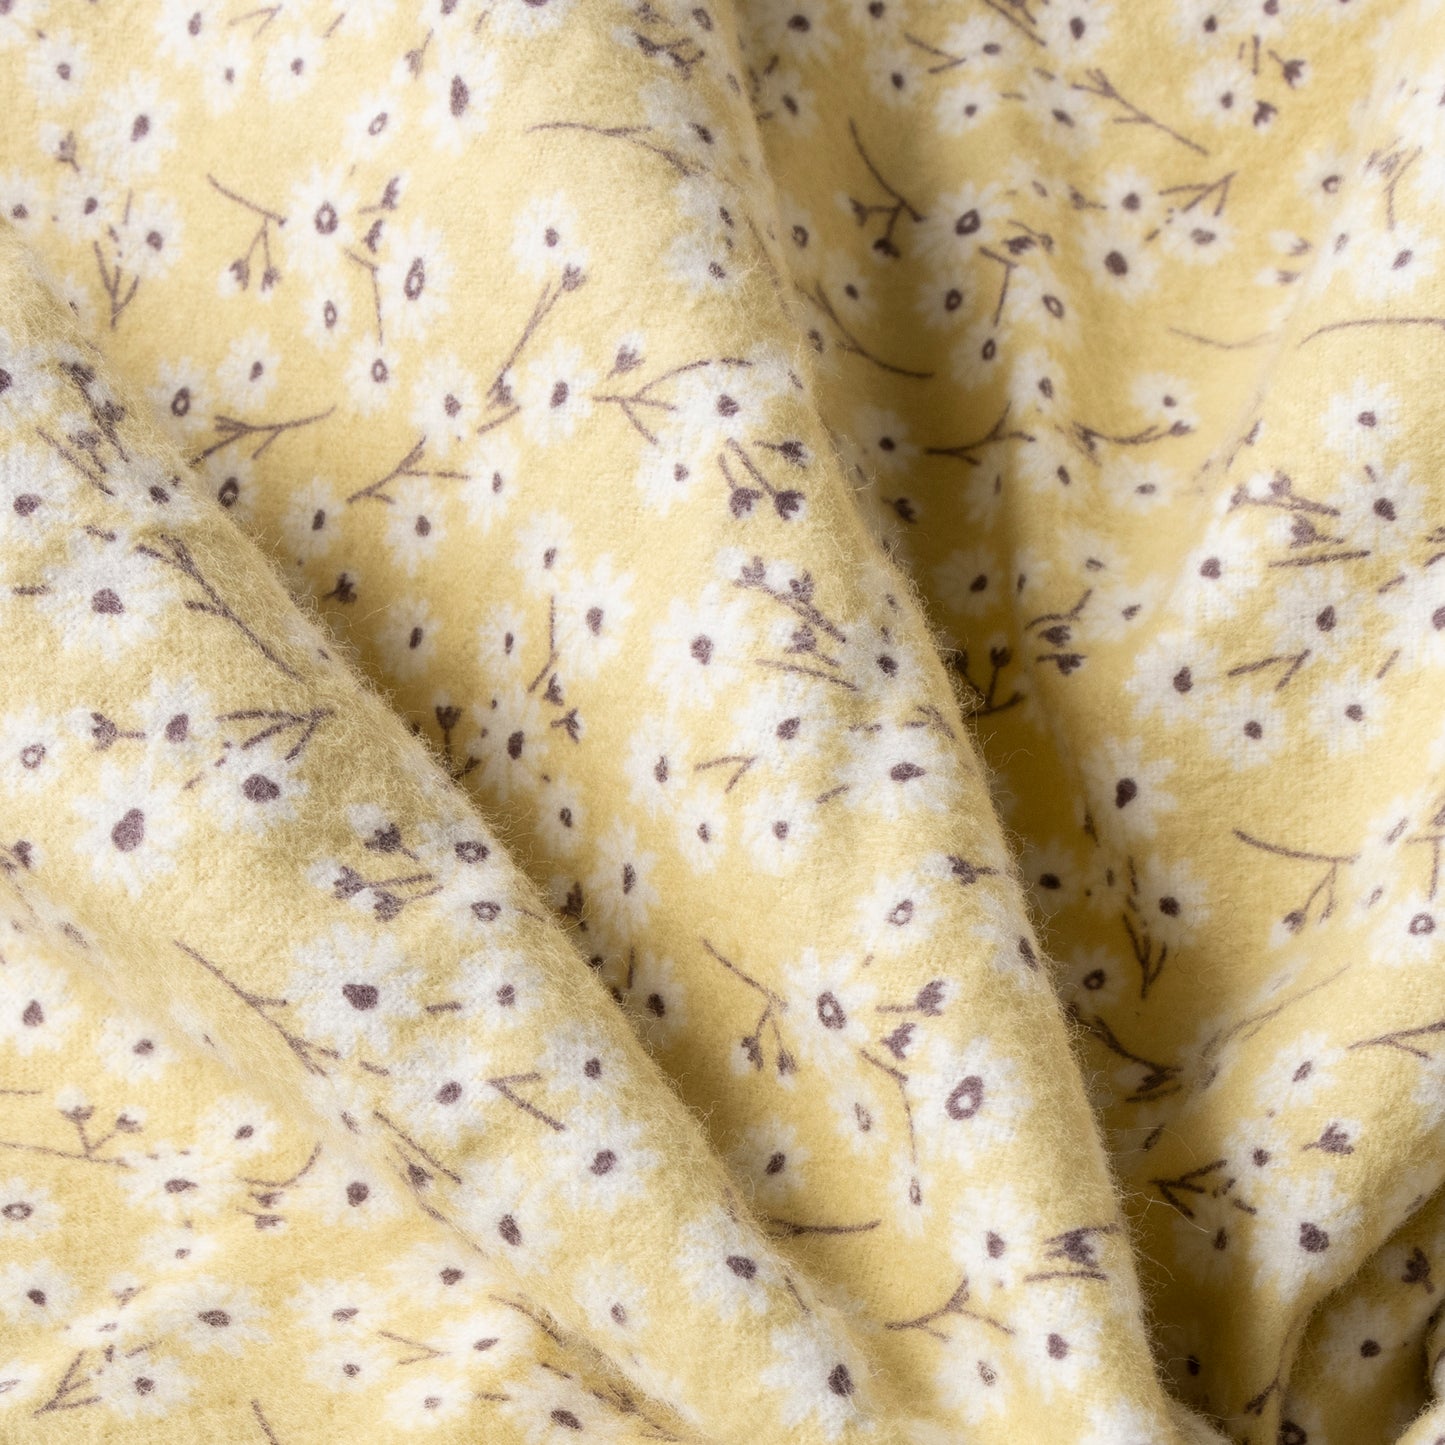  Golden Daisies Deluxe Flannel Fitted Crib Sheet - fabric details